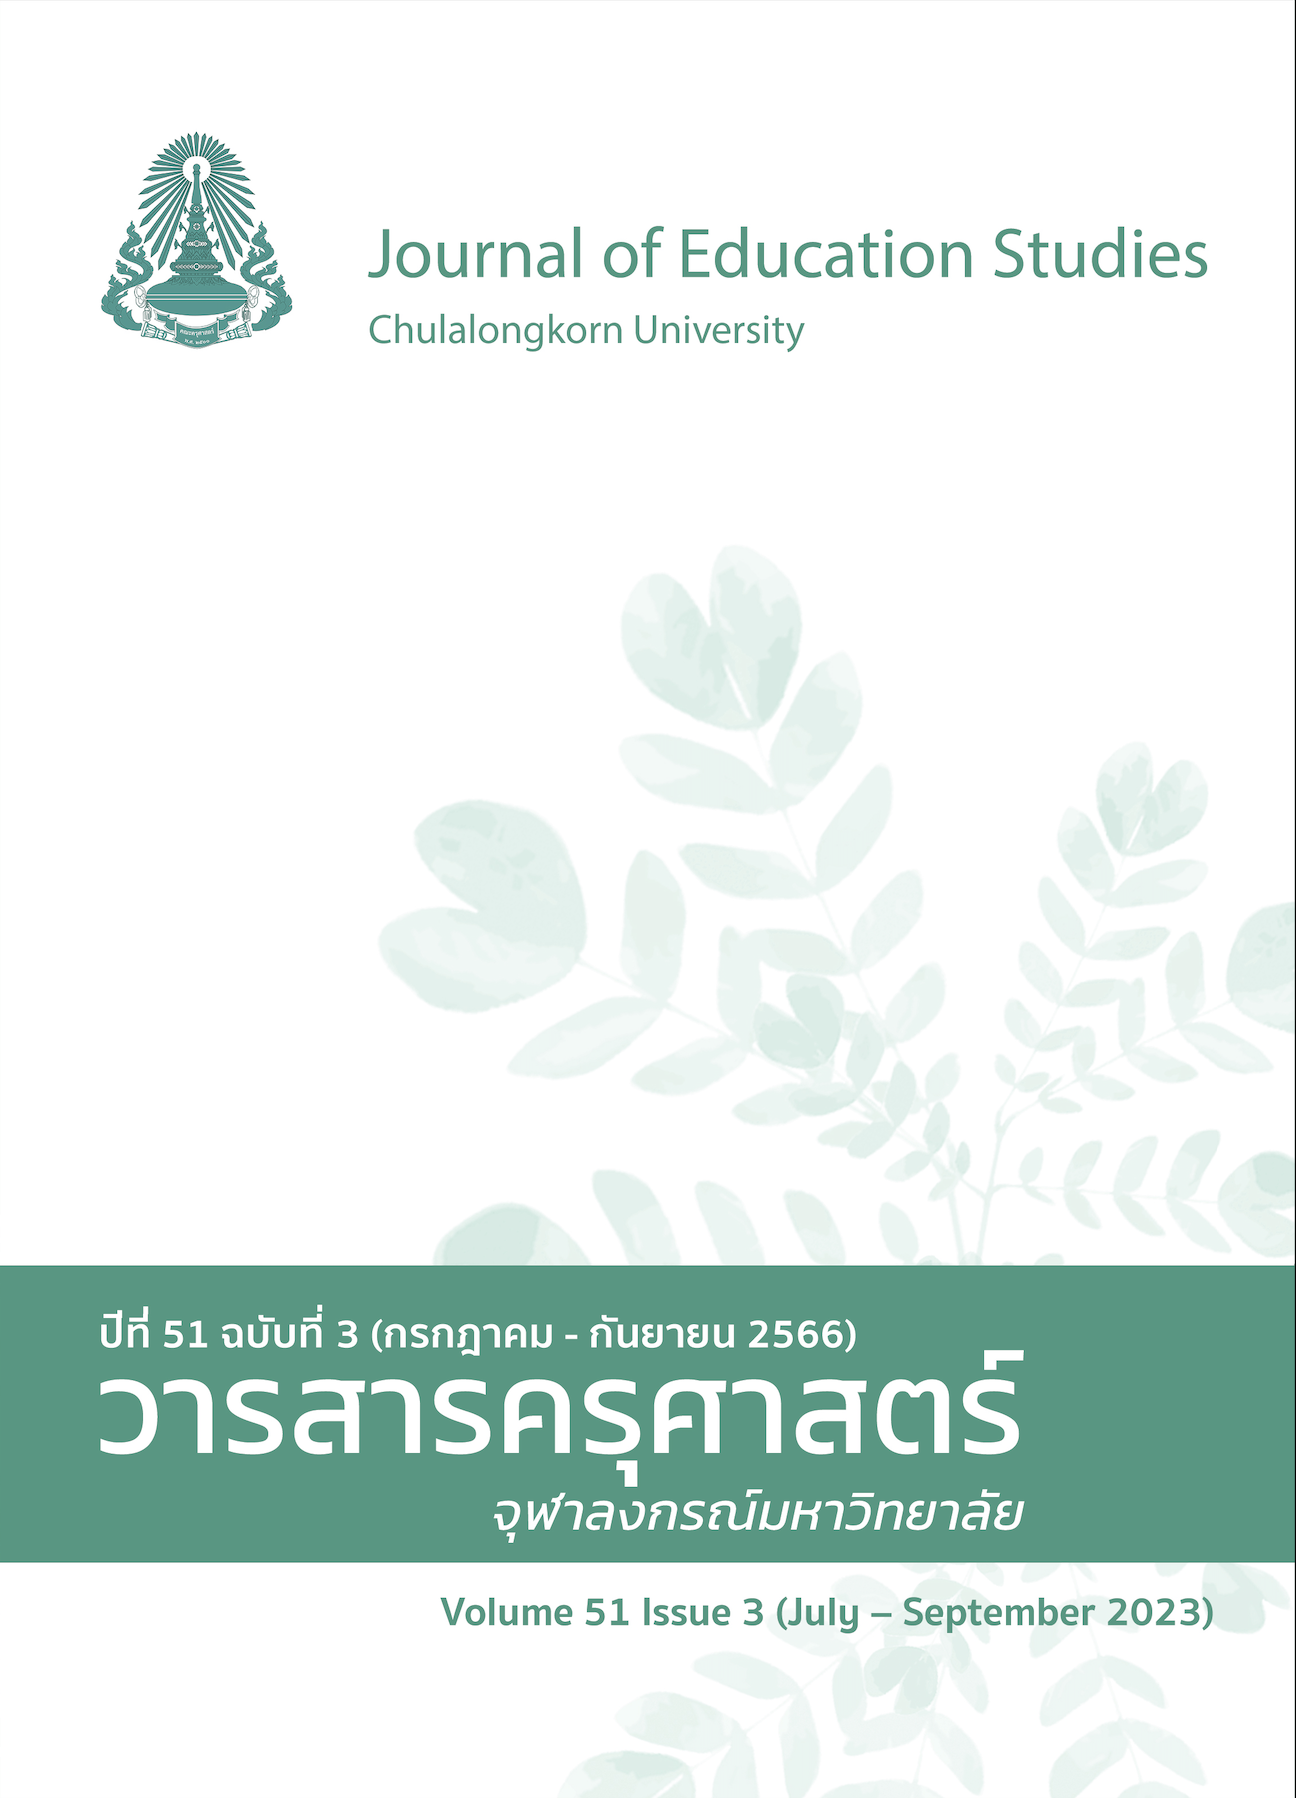 					View Vol. 51 No. 3 (2023): Journal of Education Studies, Volume 51 Issue 3 (July - September 2023)
				